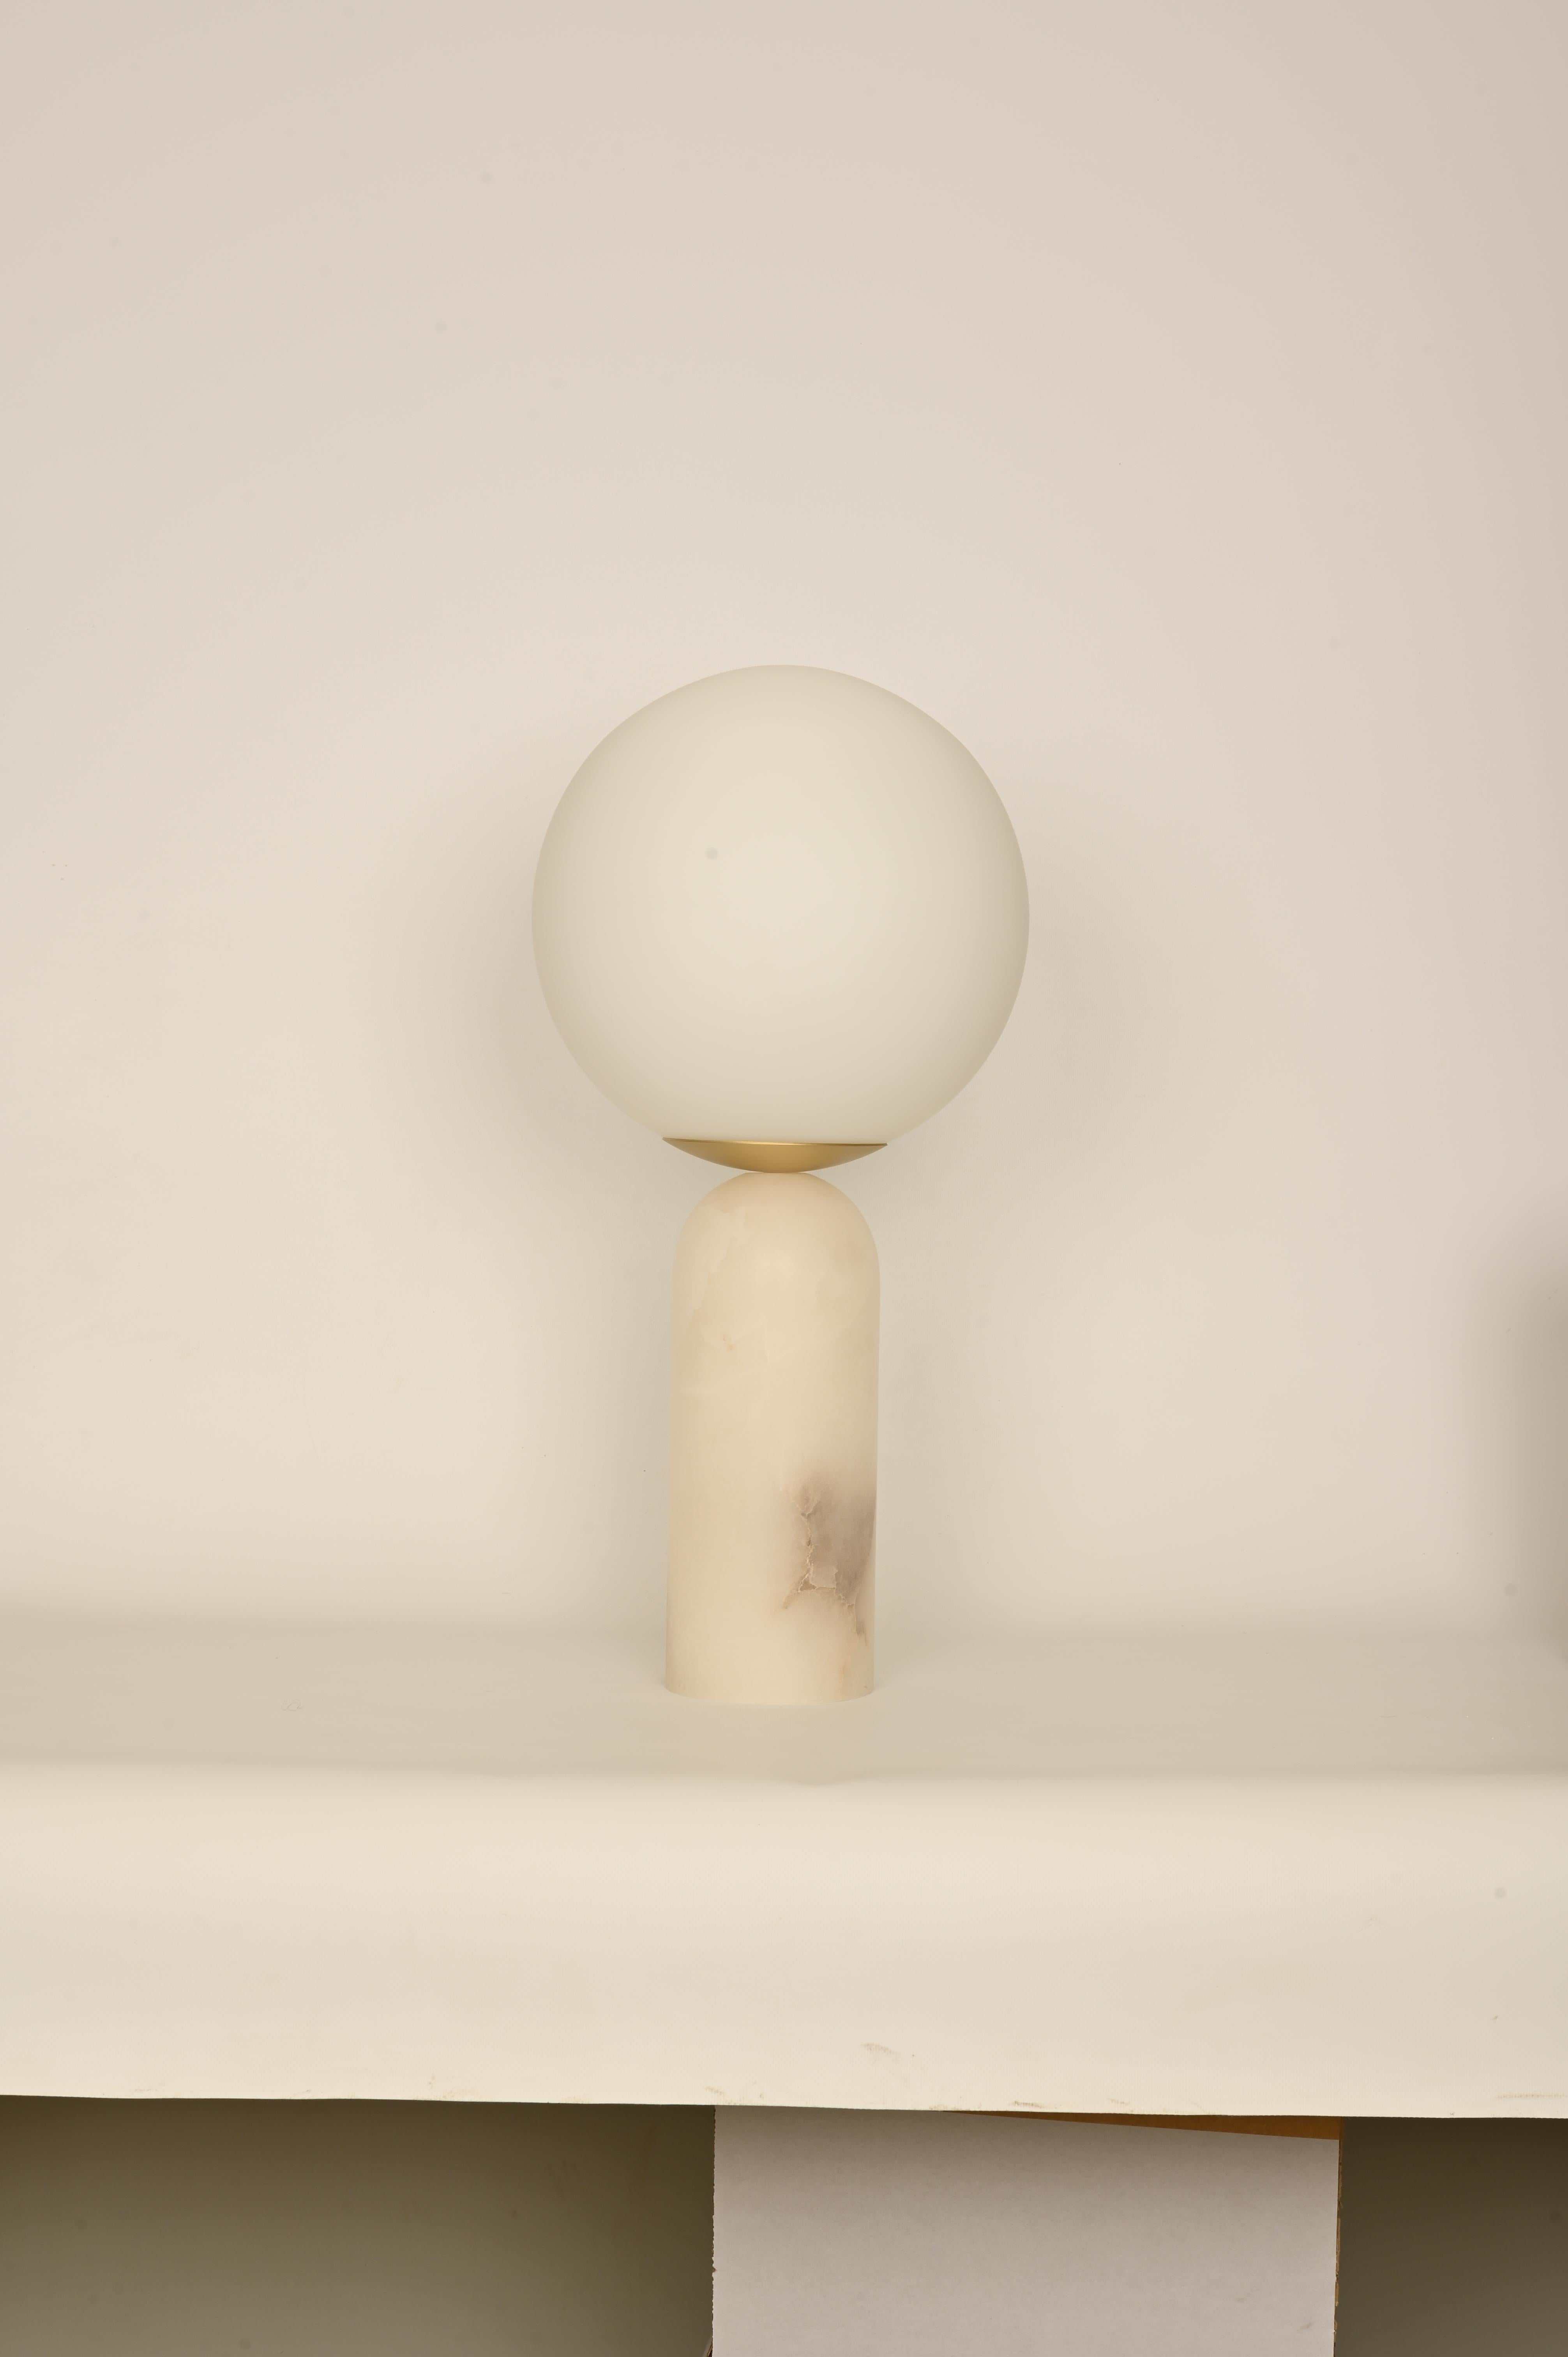 White Alabaster and Brass Atlas Table Lamp by Simone & Marcel
Dimensions: Ø 30 x H 60 cm.
Materials: Glass, brass and white alabaster.

Also available in different marble, wood and alabaster options and finishes. Custom options available on request.